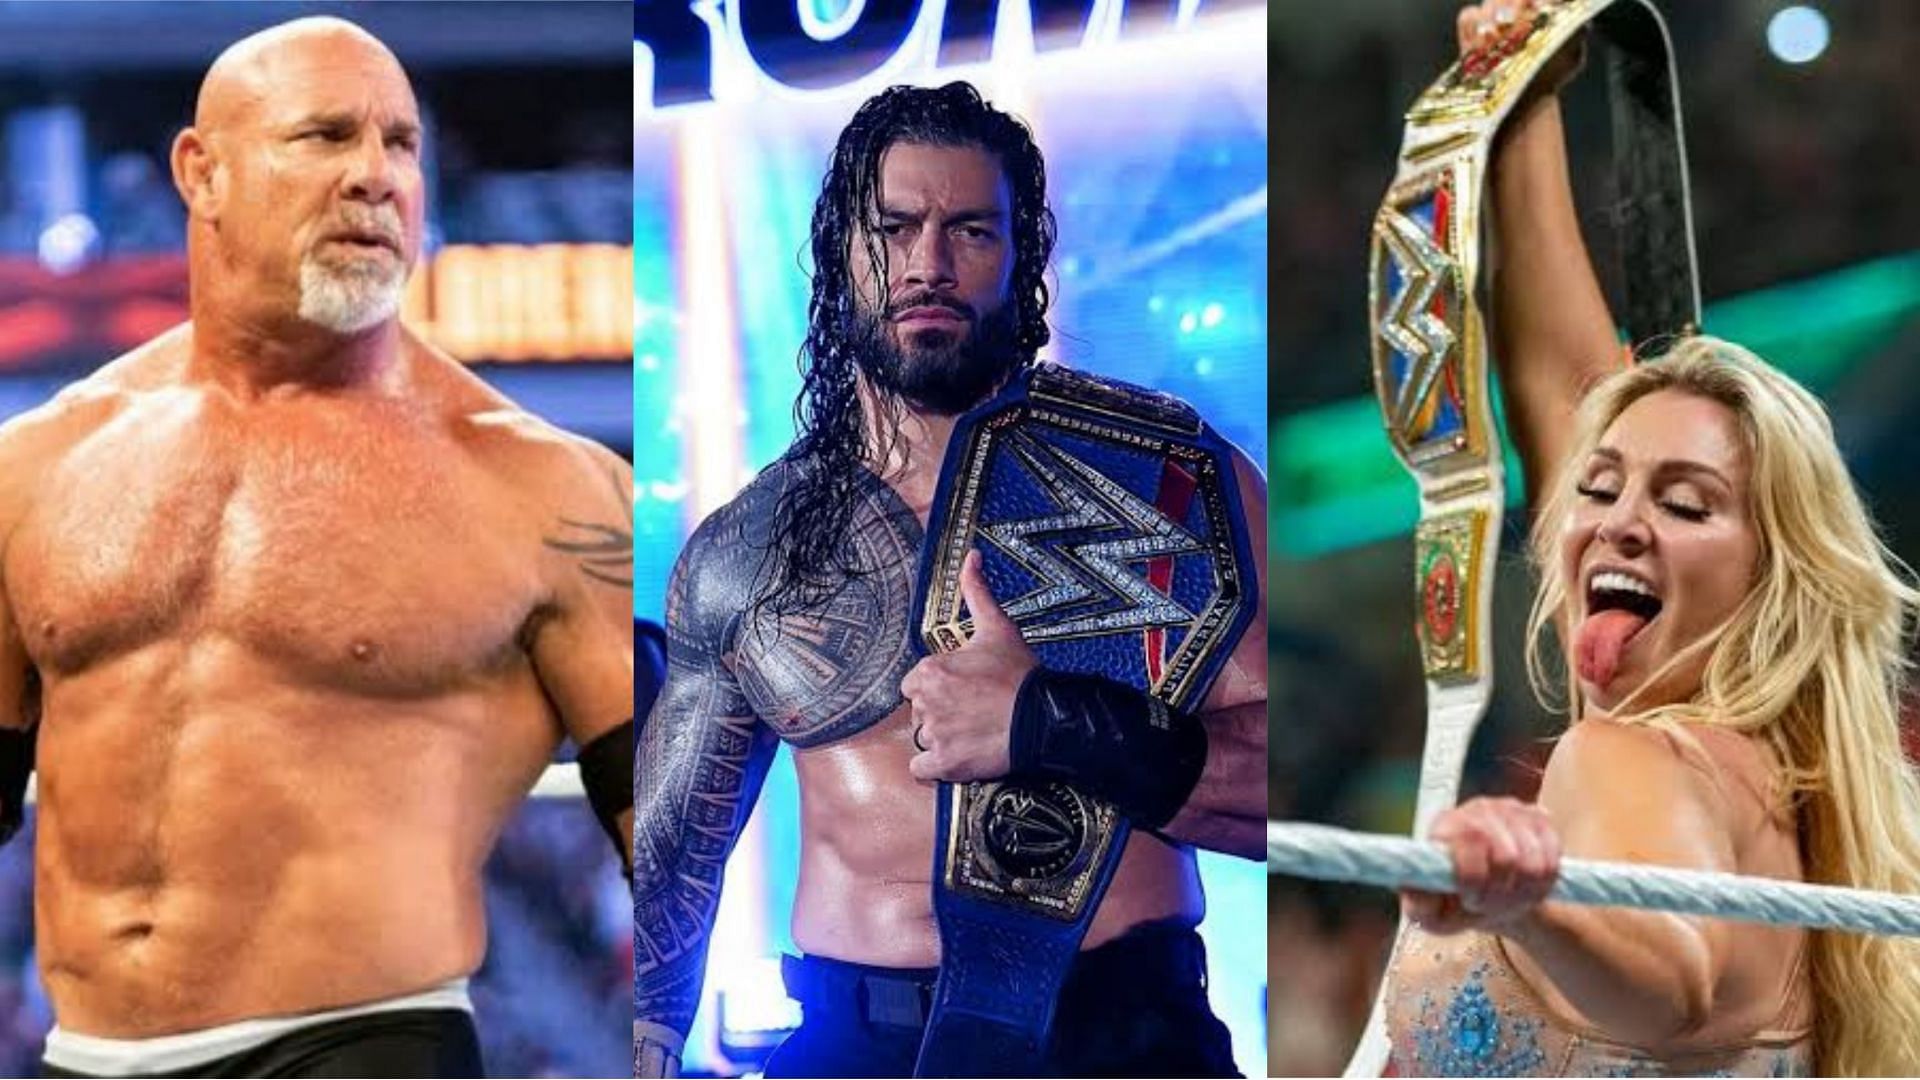 Goldberg, Roman Reigns and Charlotte Flair could all feature in Saudi Arabia